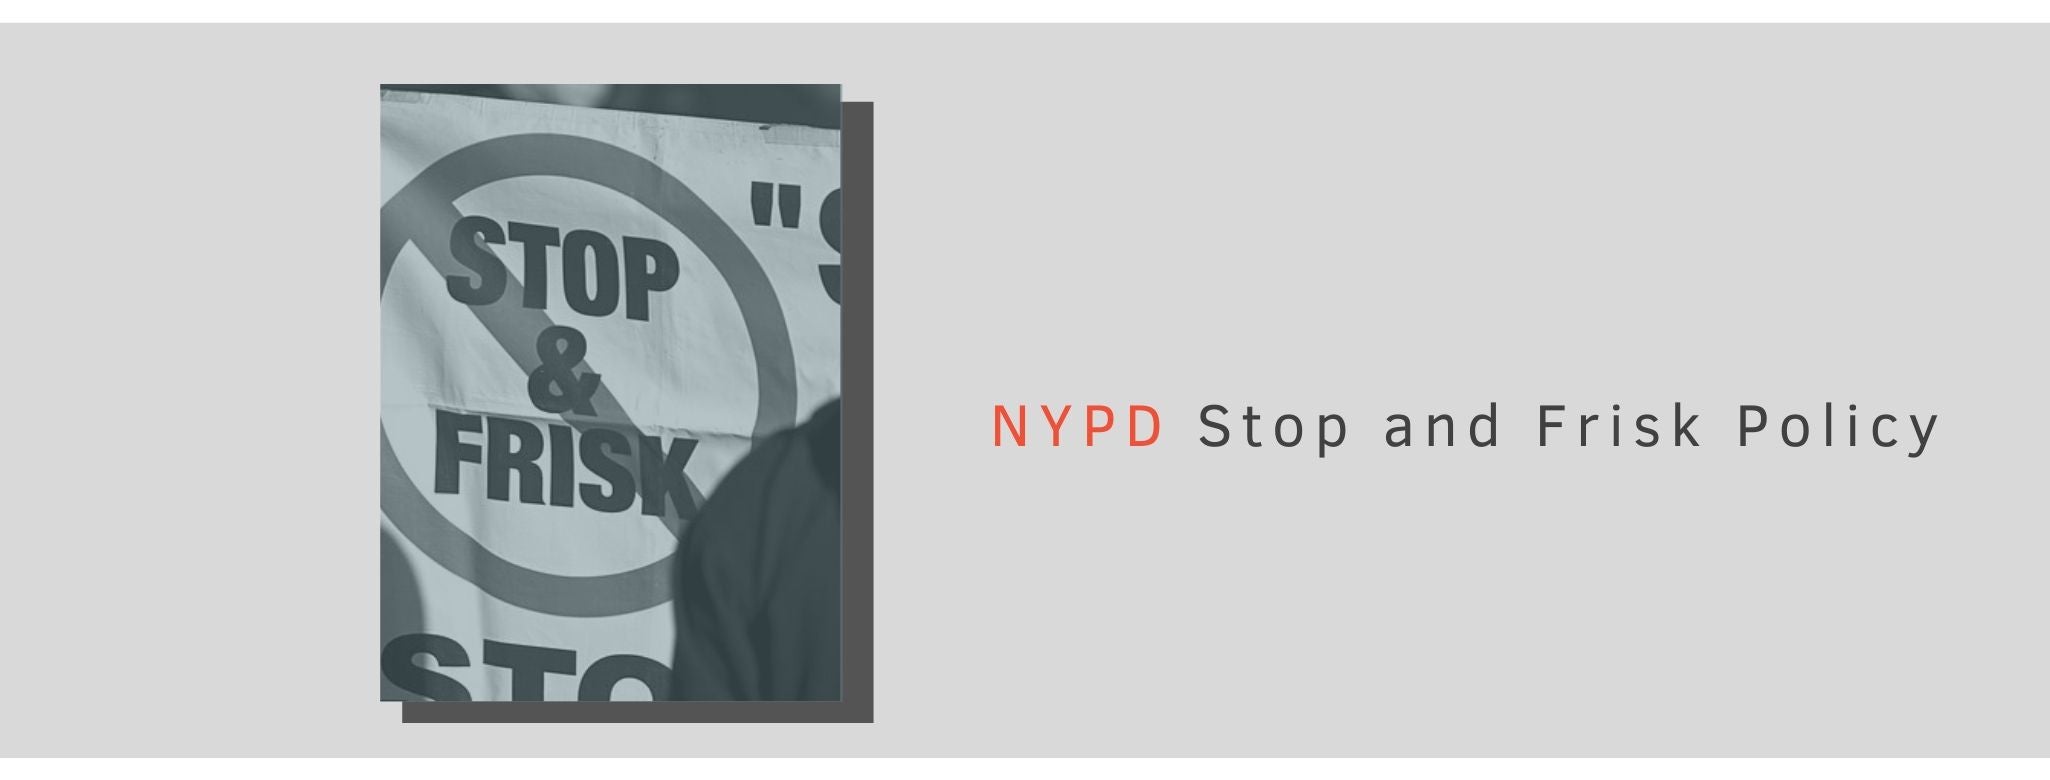 NYPD stop and frisk graphic showing a sign that denounces the policy